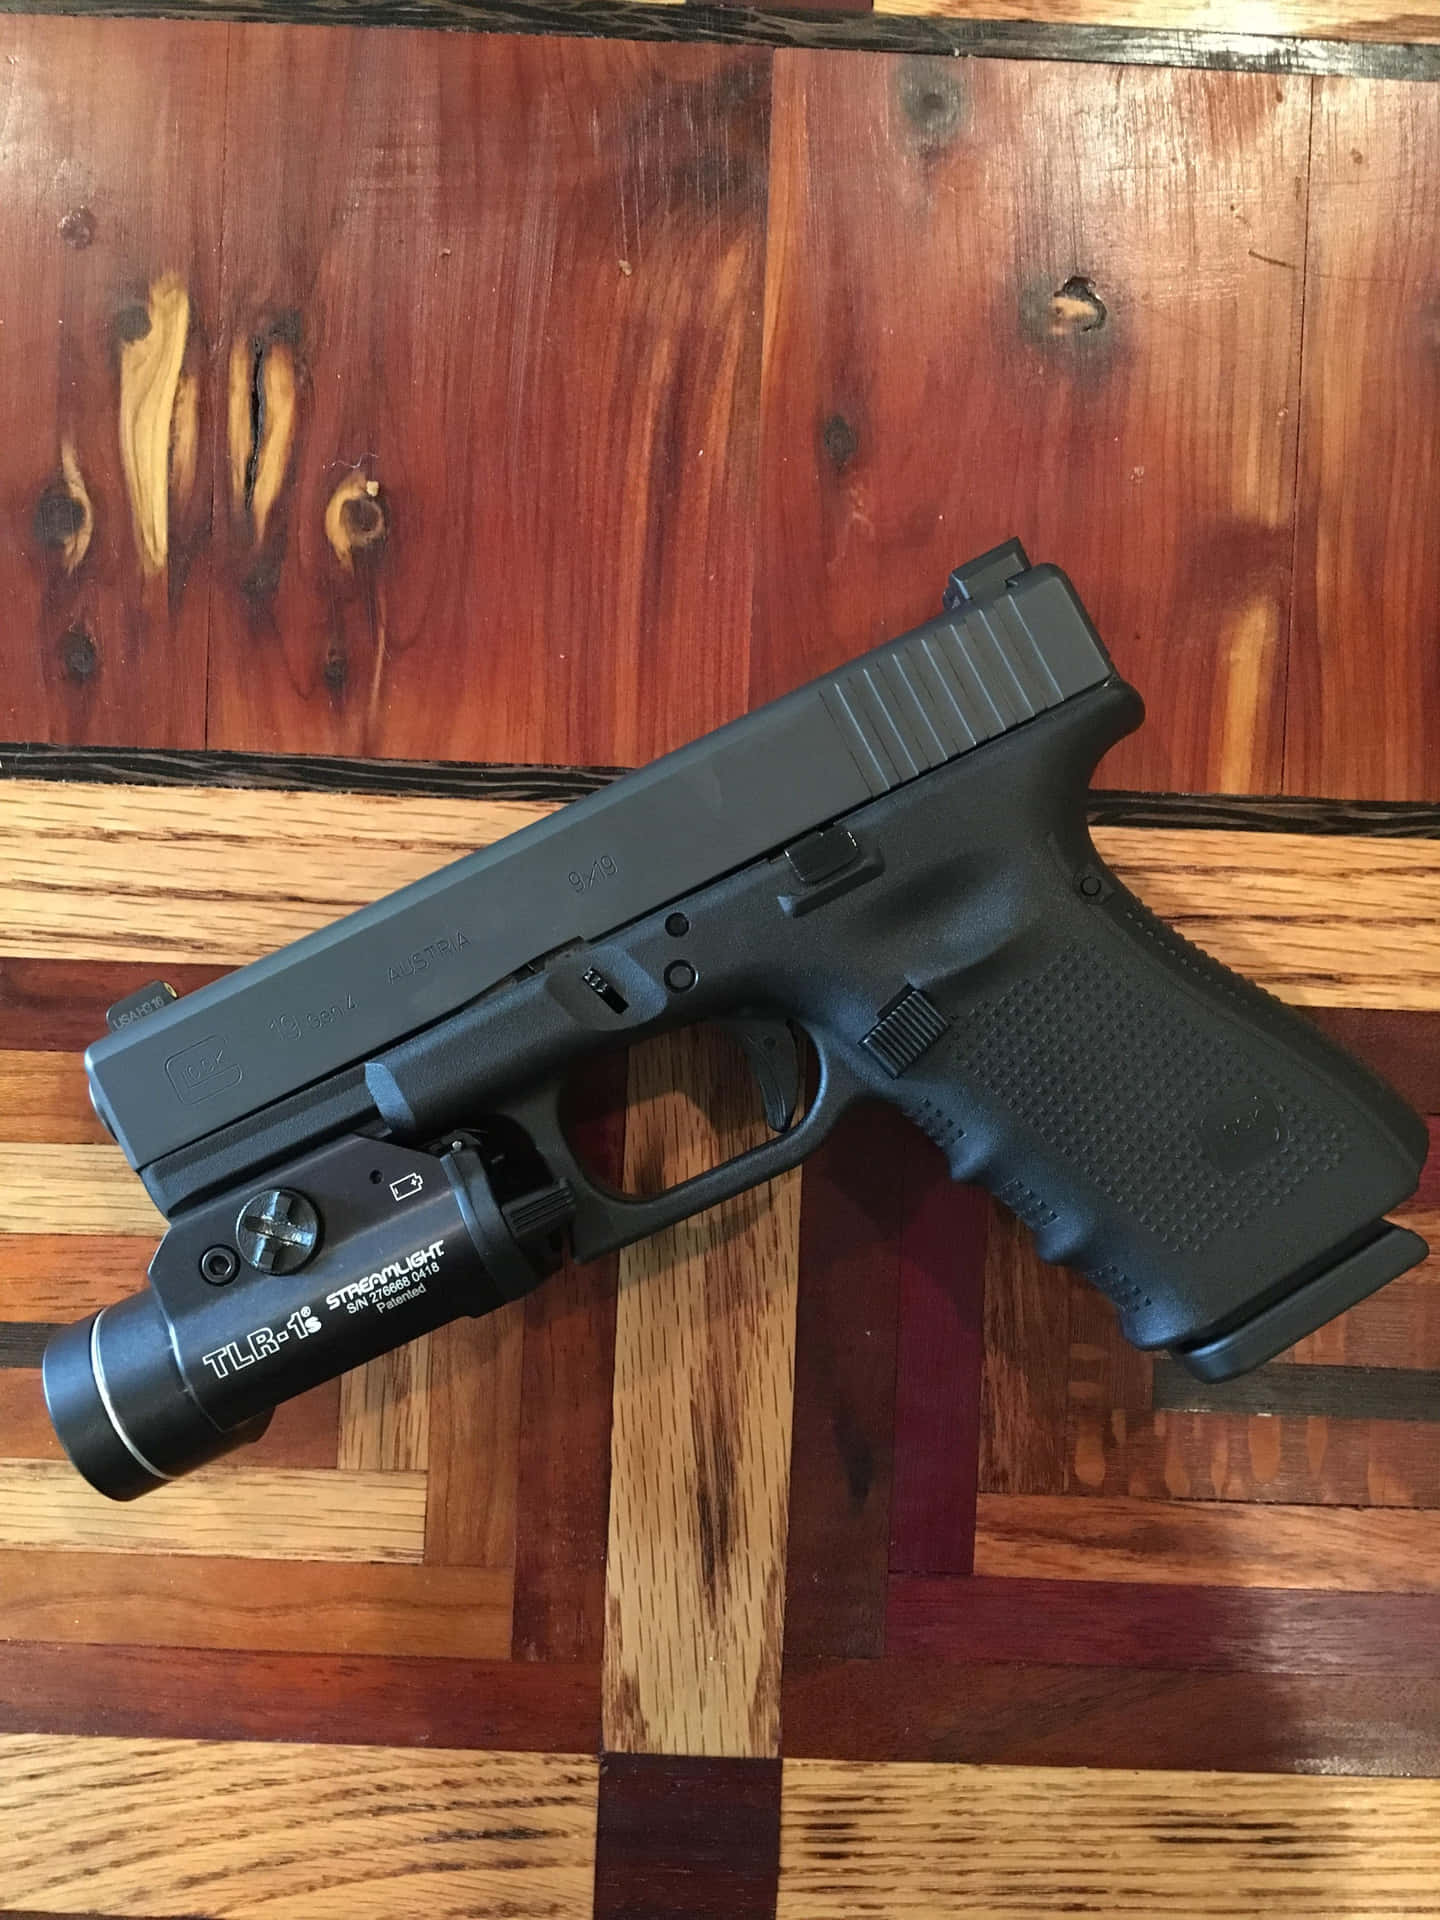 This Glock 19 stands ready for use.